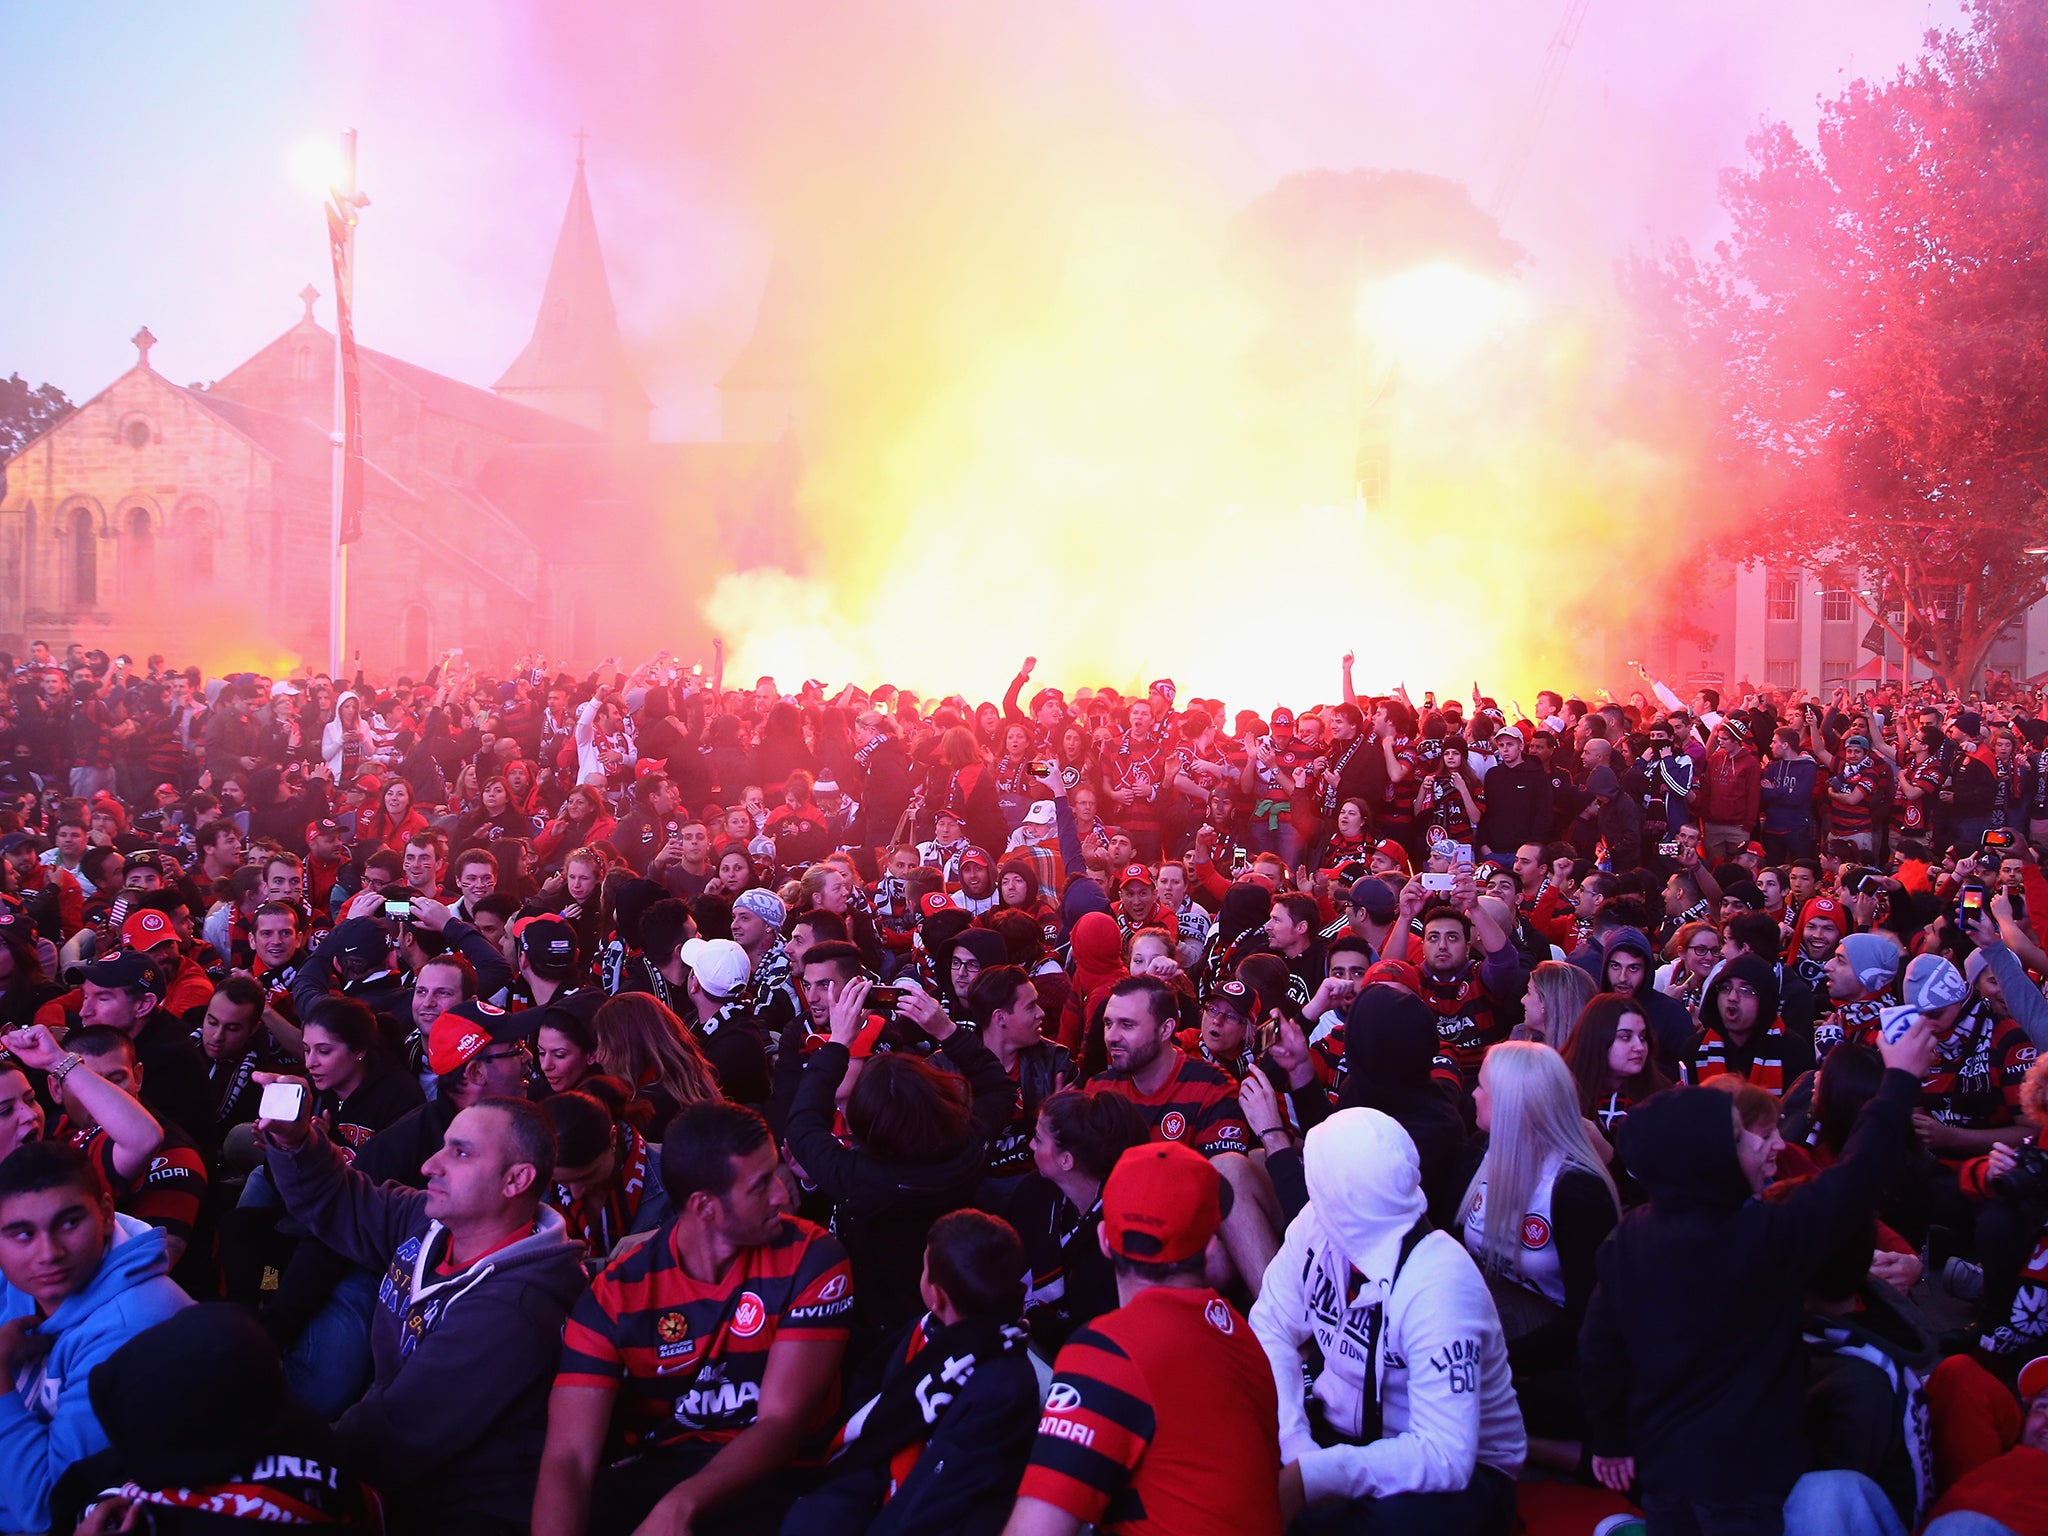 Wanderers fans light flares as they watch the Asian Champions League final match between Western Sydney Wanders and Al Hilal at Centenary Square in Parramatta